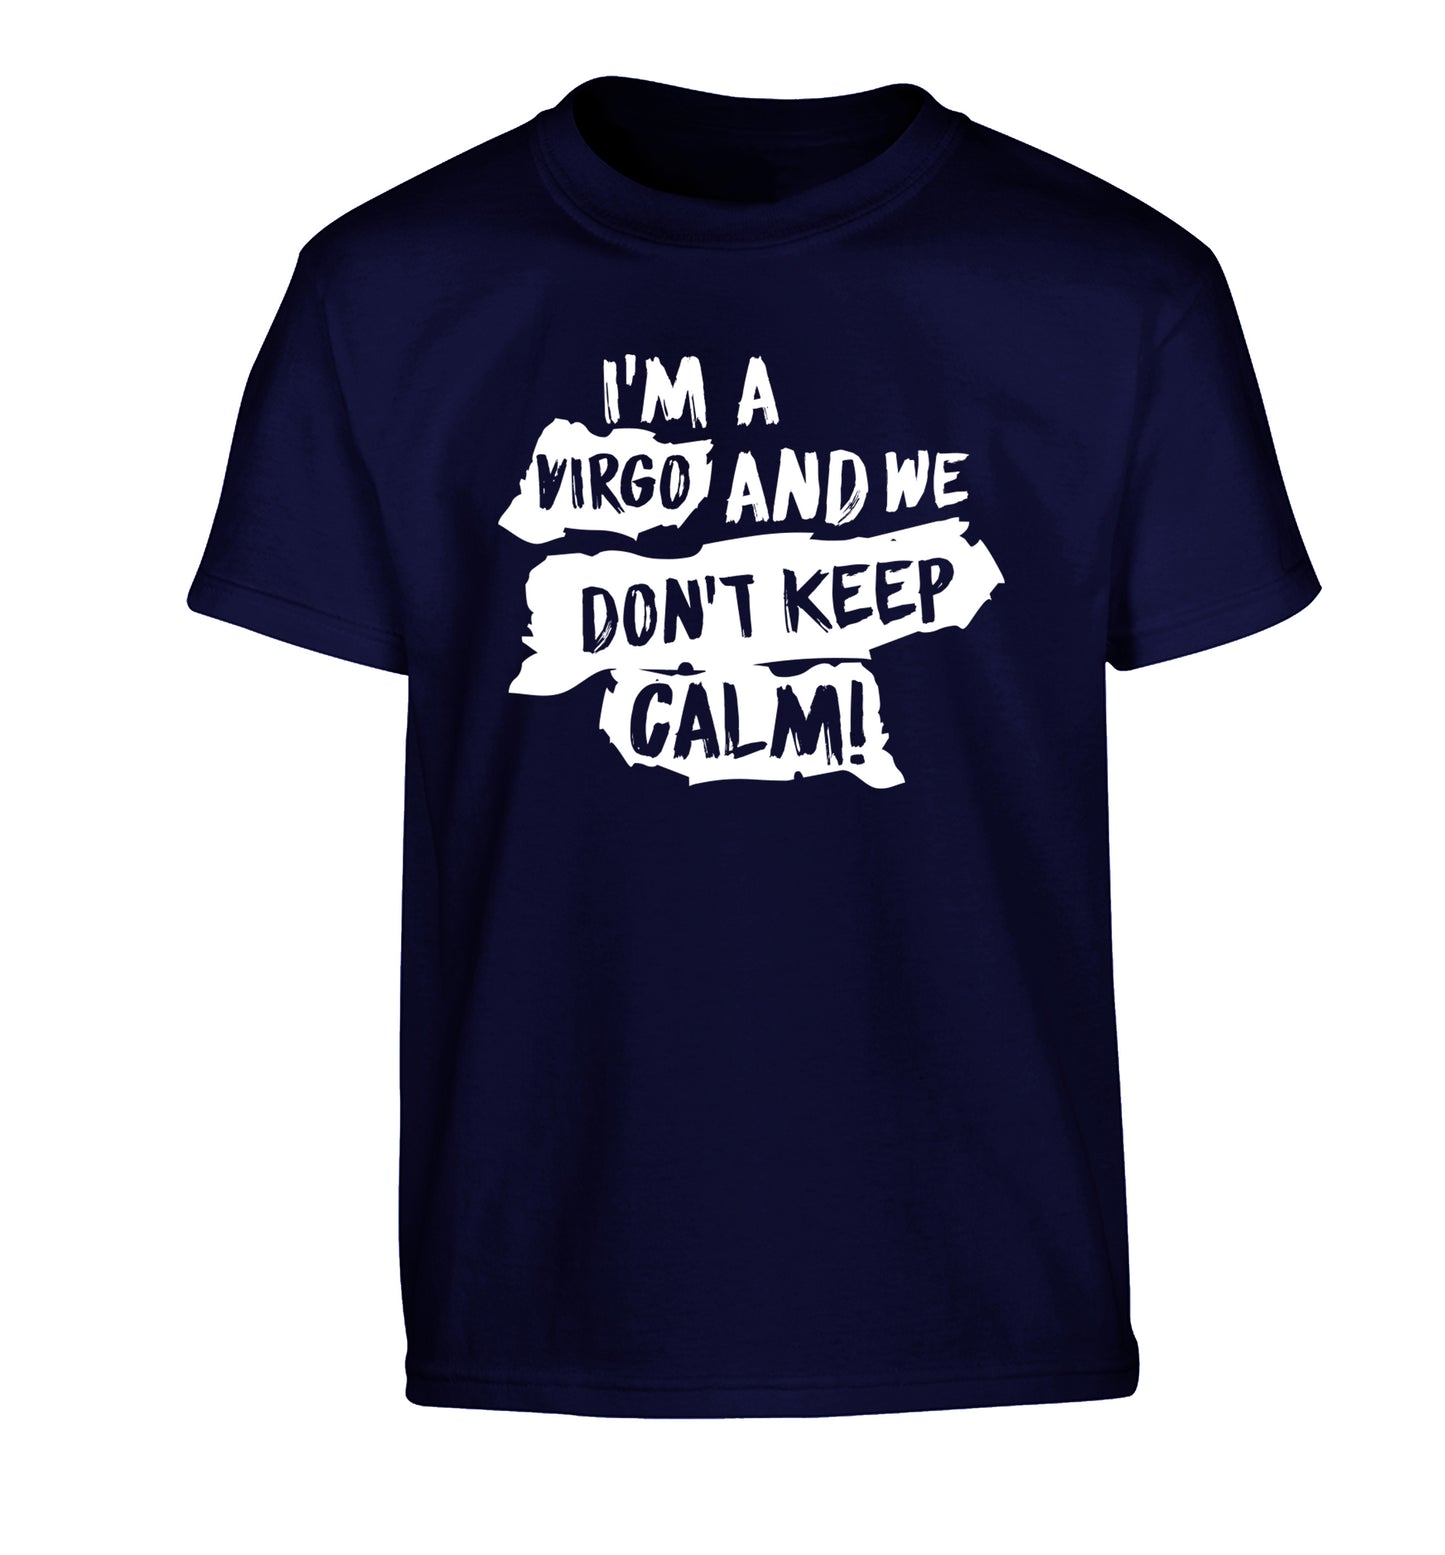 I'm a virgo and we don't keep calm Children's navy Tshirt 12-13 Years